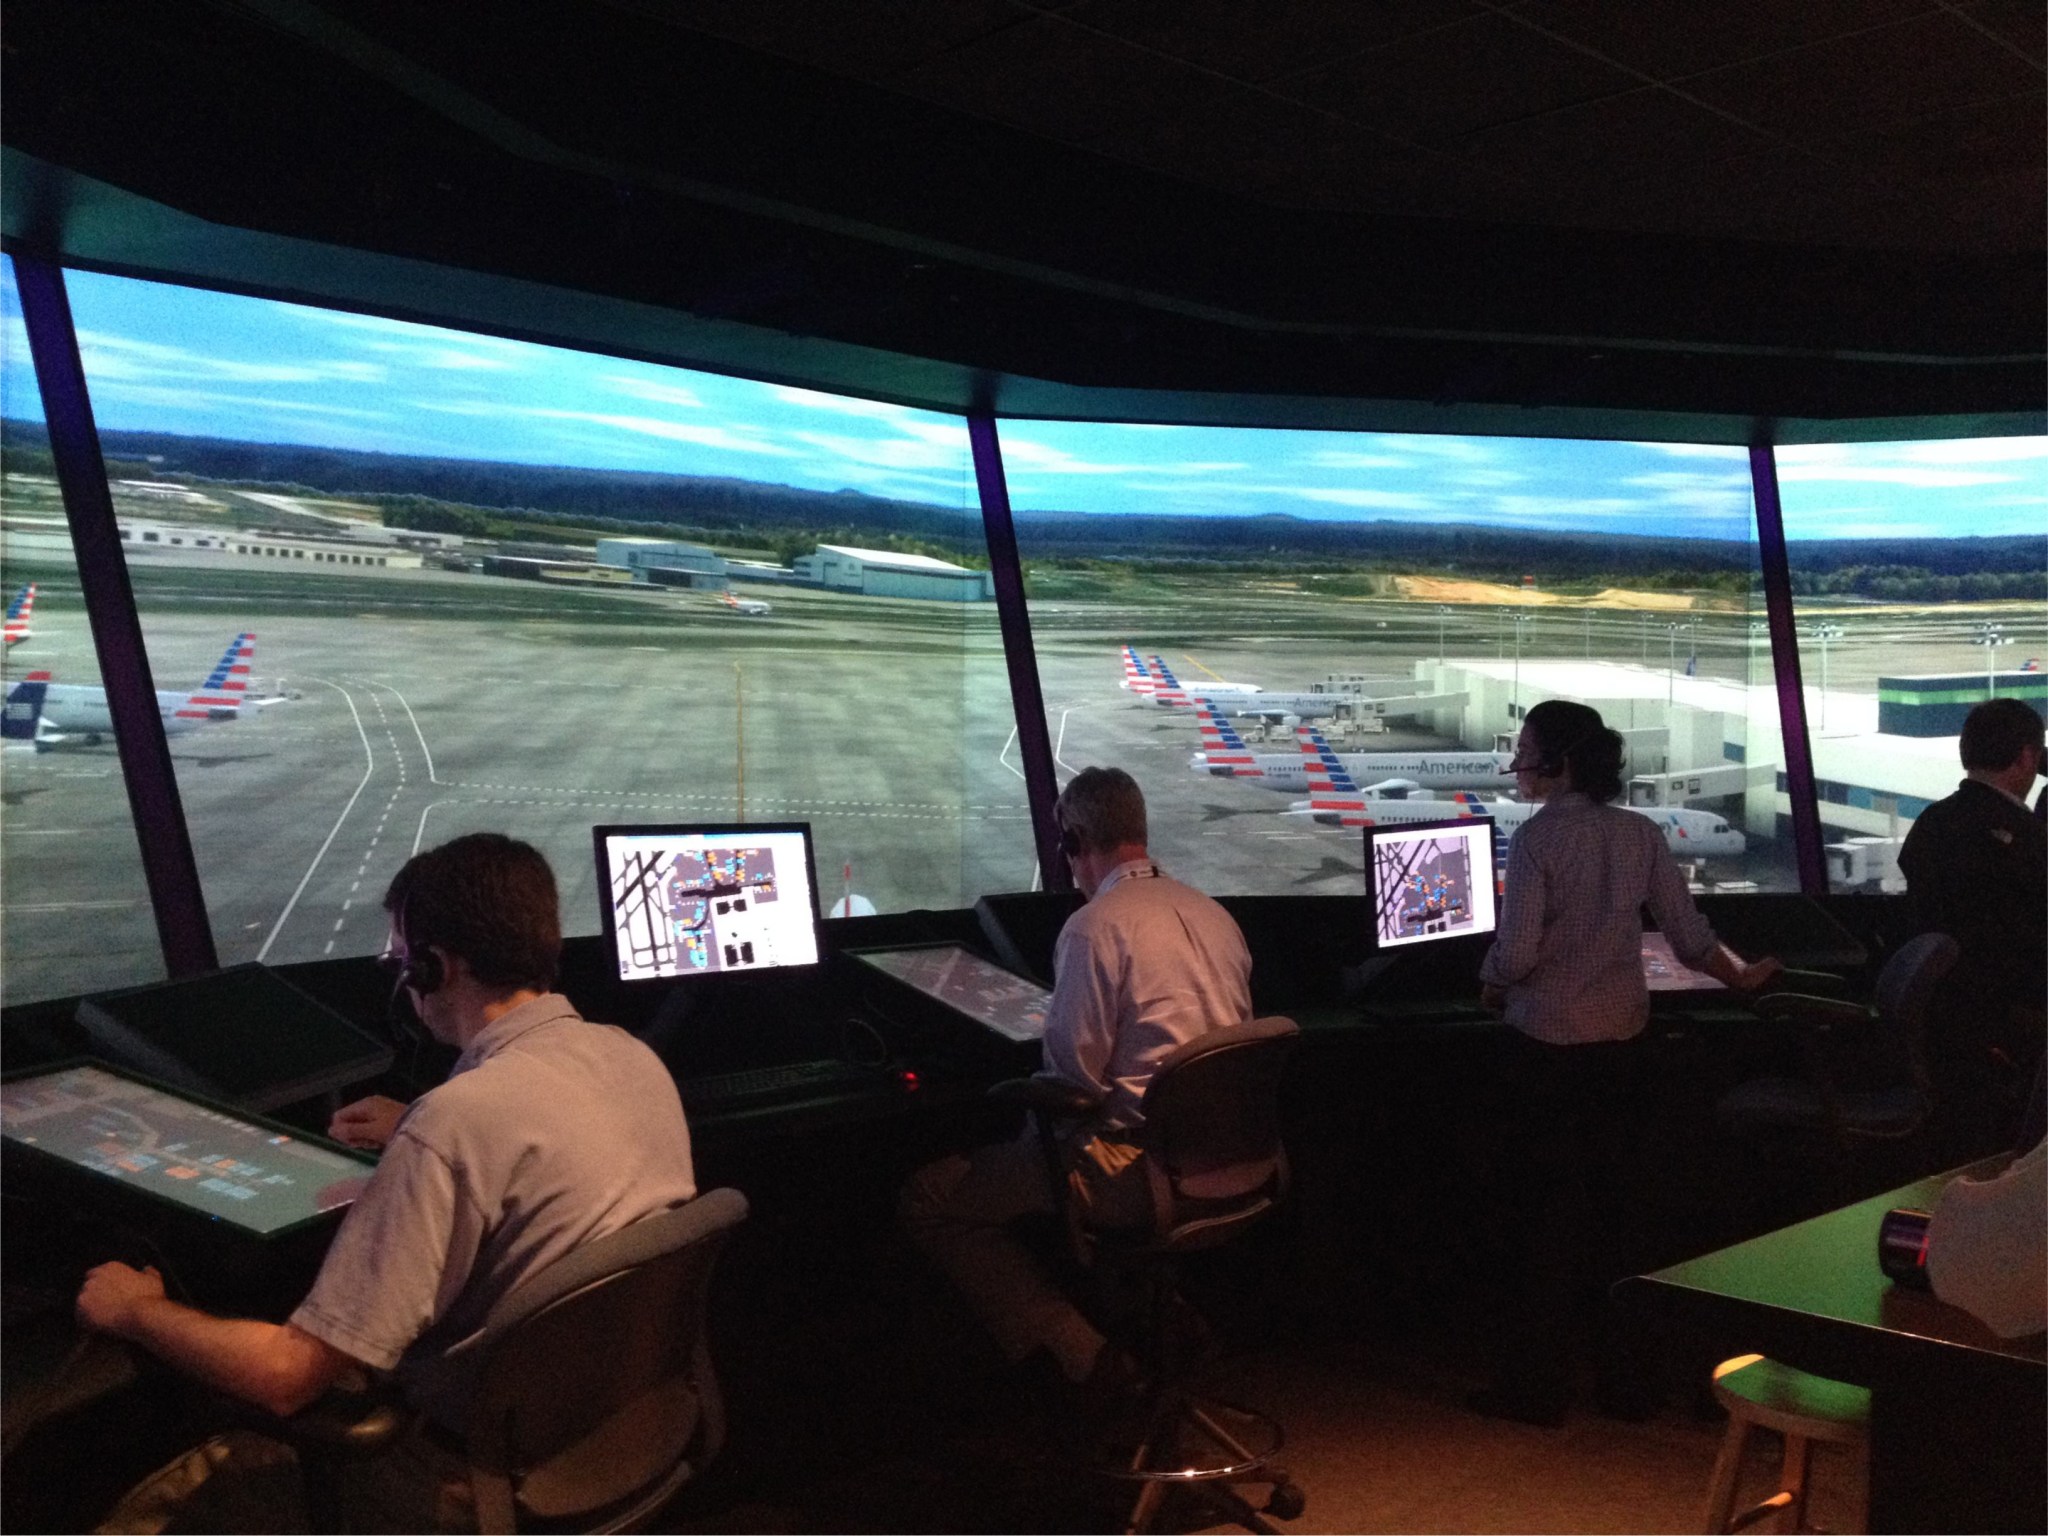 View of airport from FutureFlight Central (FFC) virtual air traffic control tower.